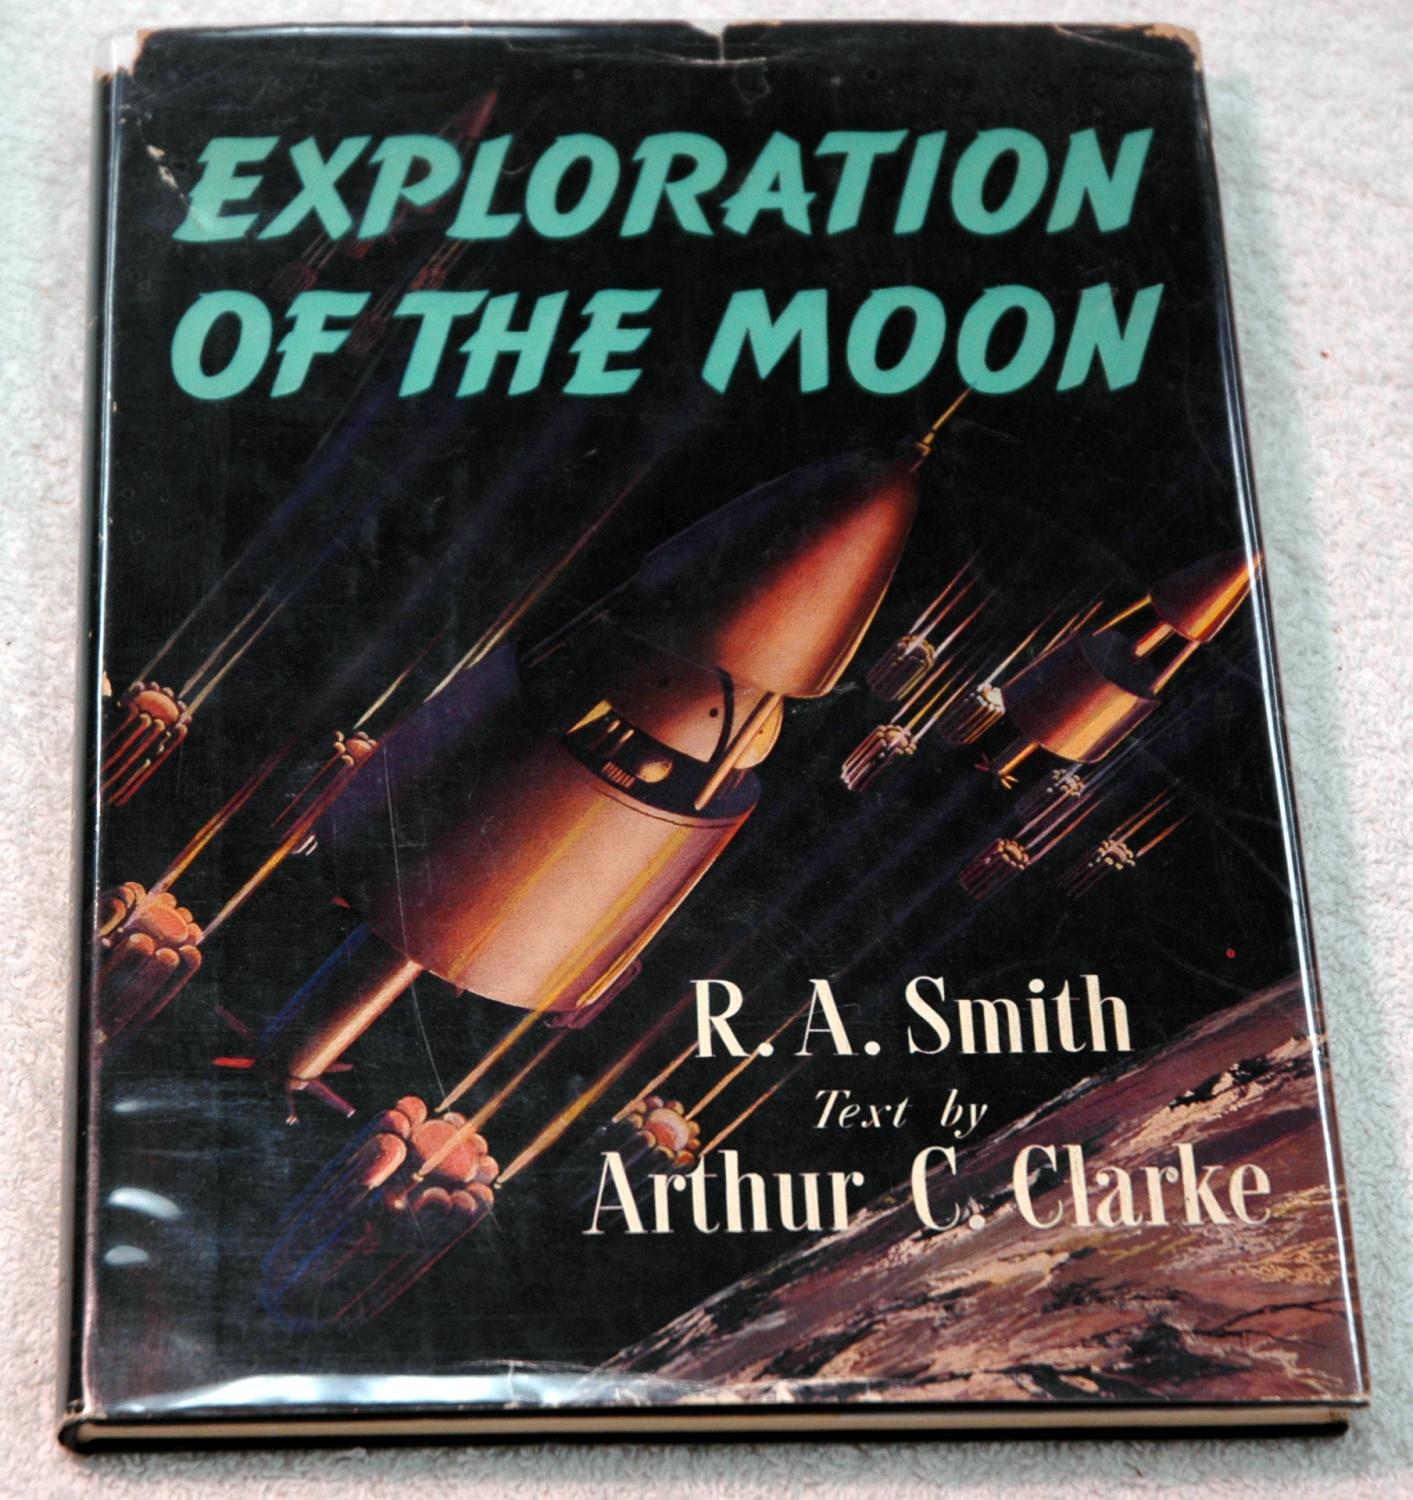 Exploration of the Moon (signed) by Arthur C. Clarke: Very Good Hardcover (1954) First Edition